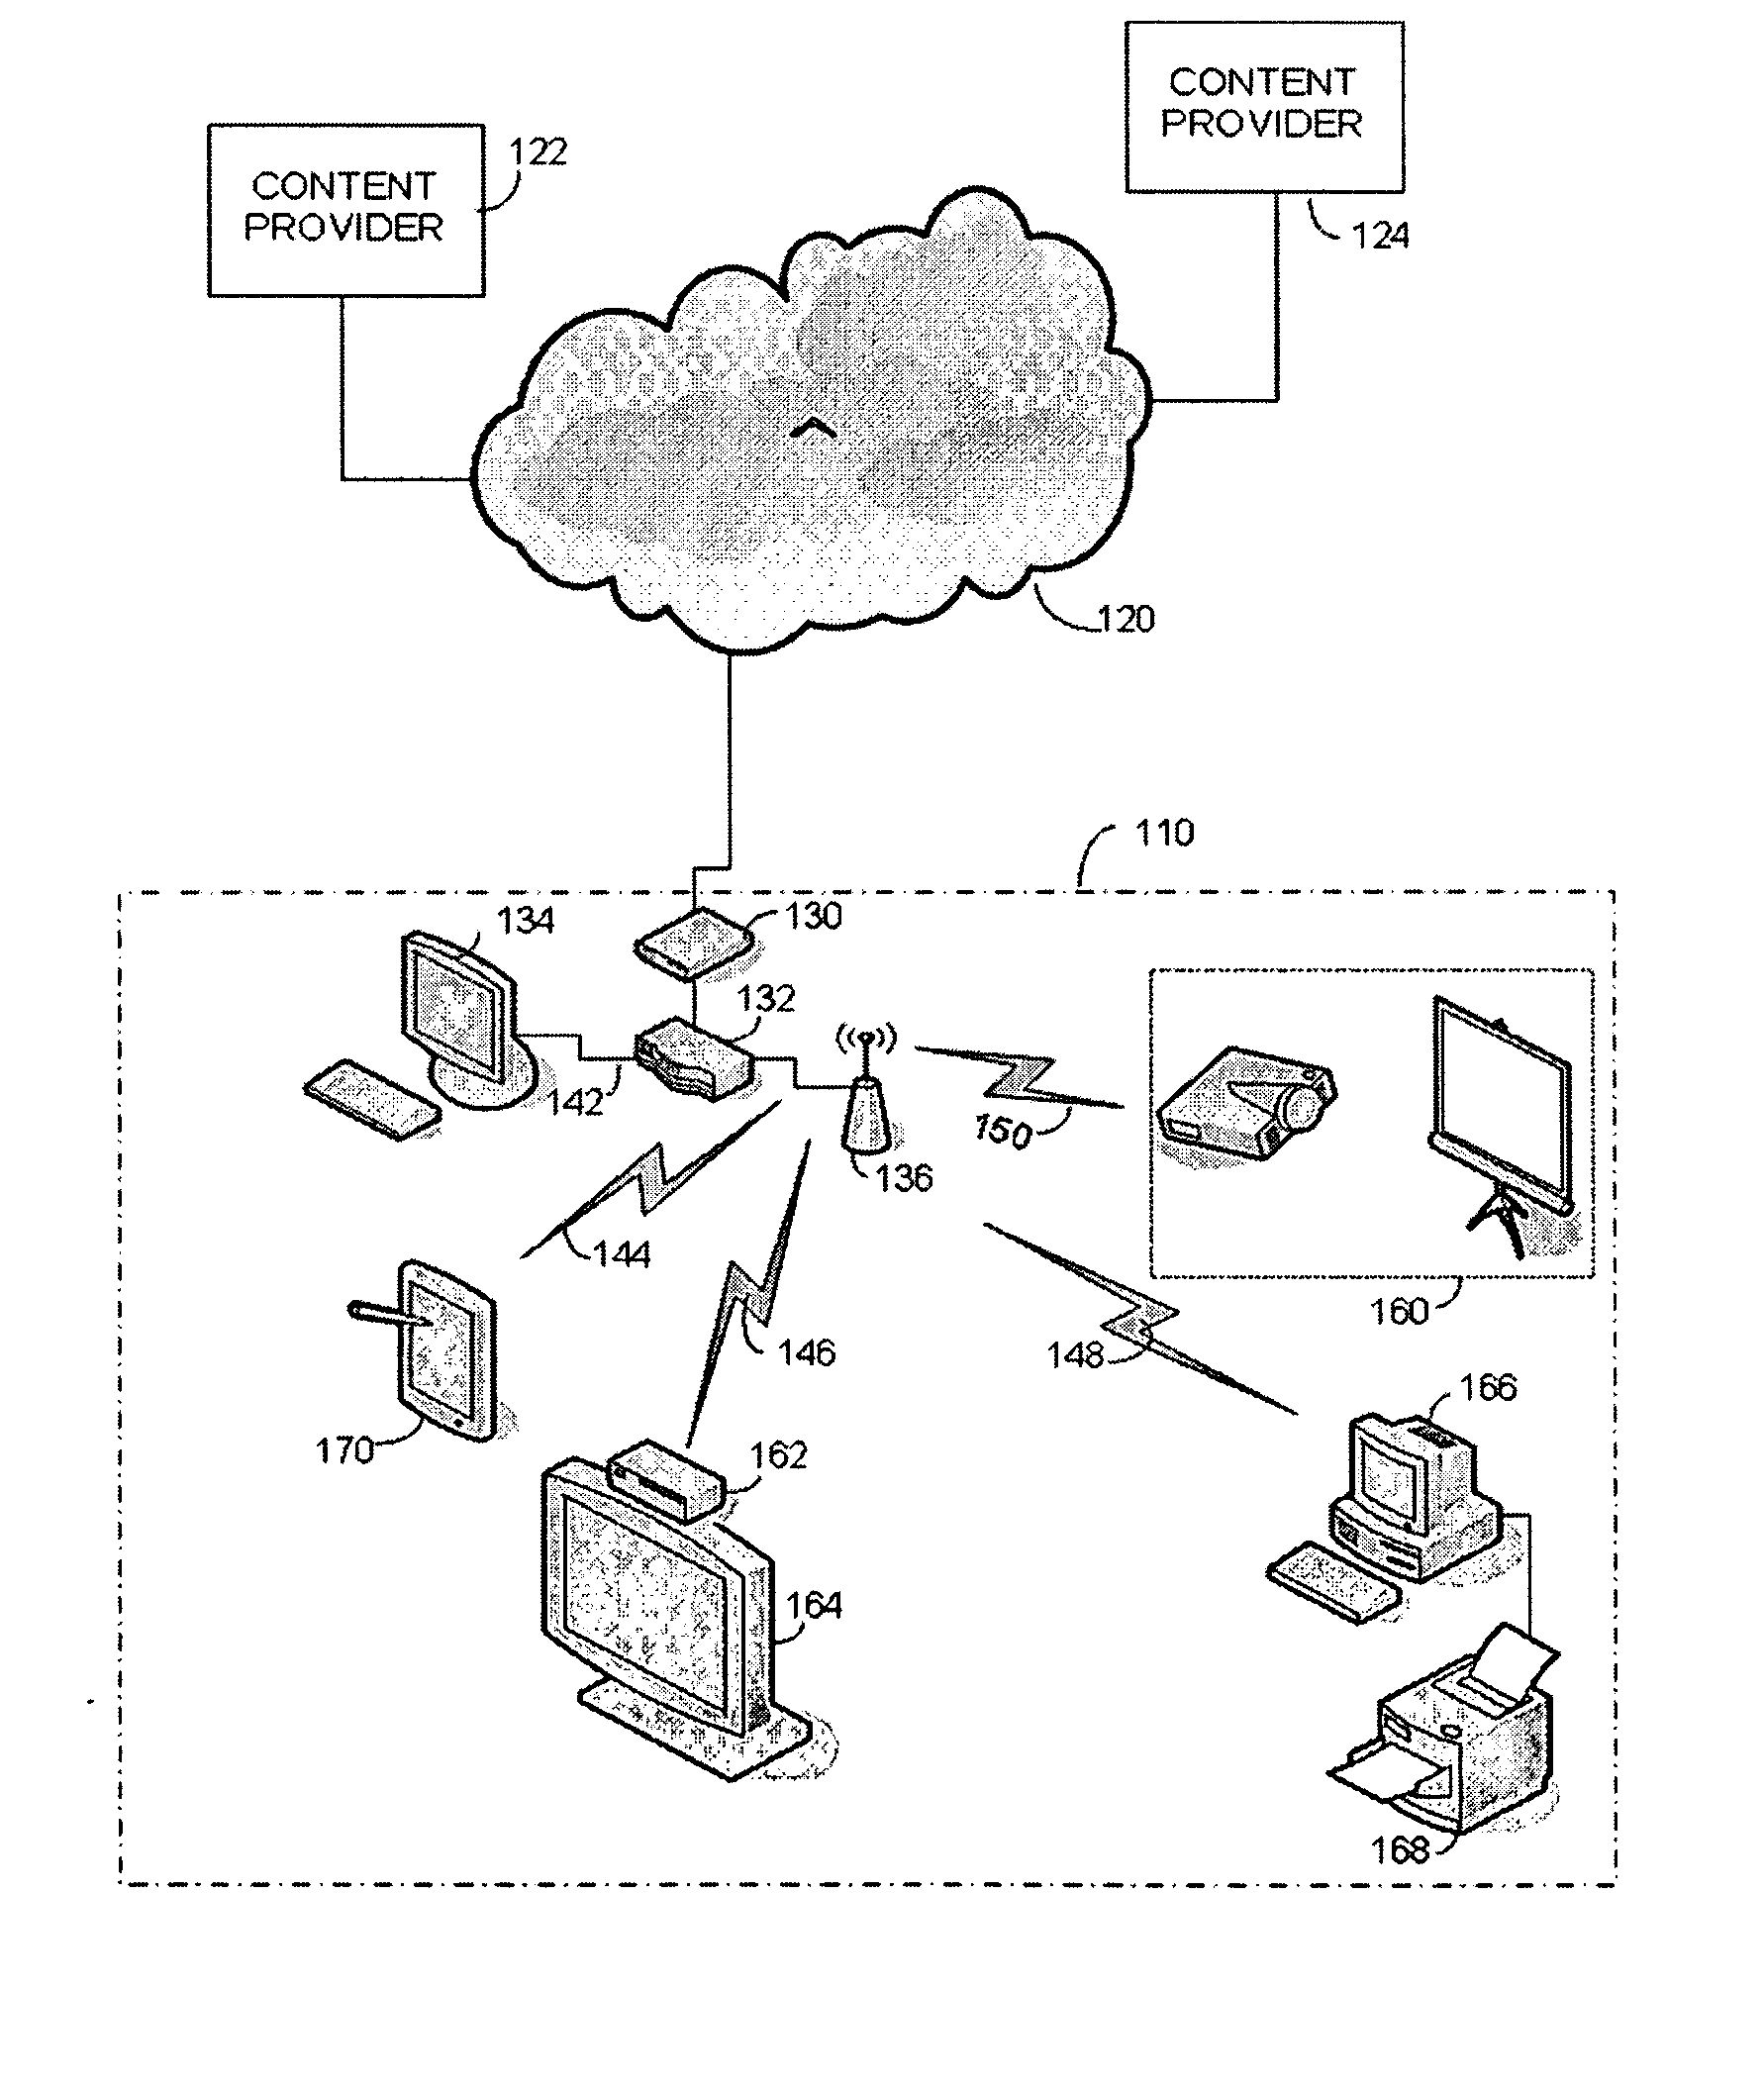 Quality of service support for A/V streams